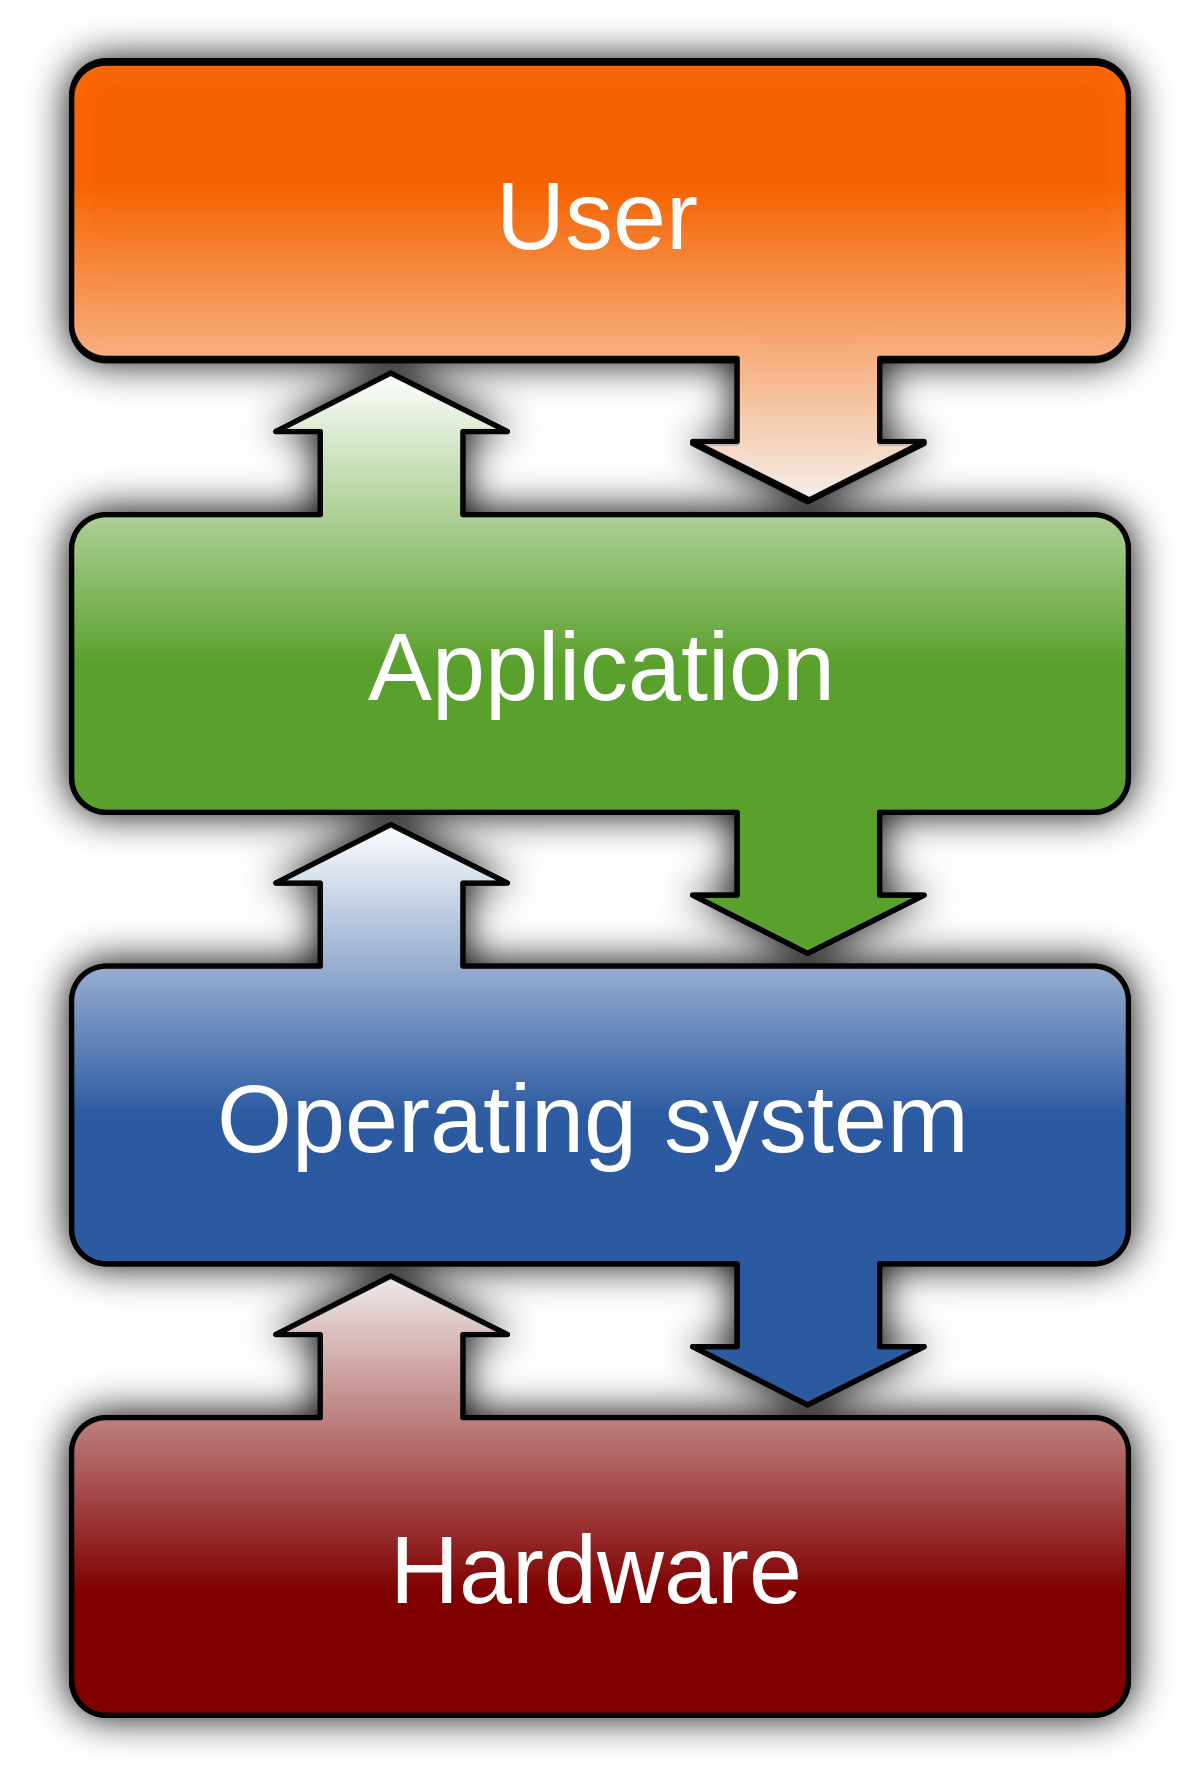 Associated software and system files